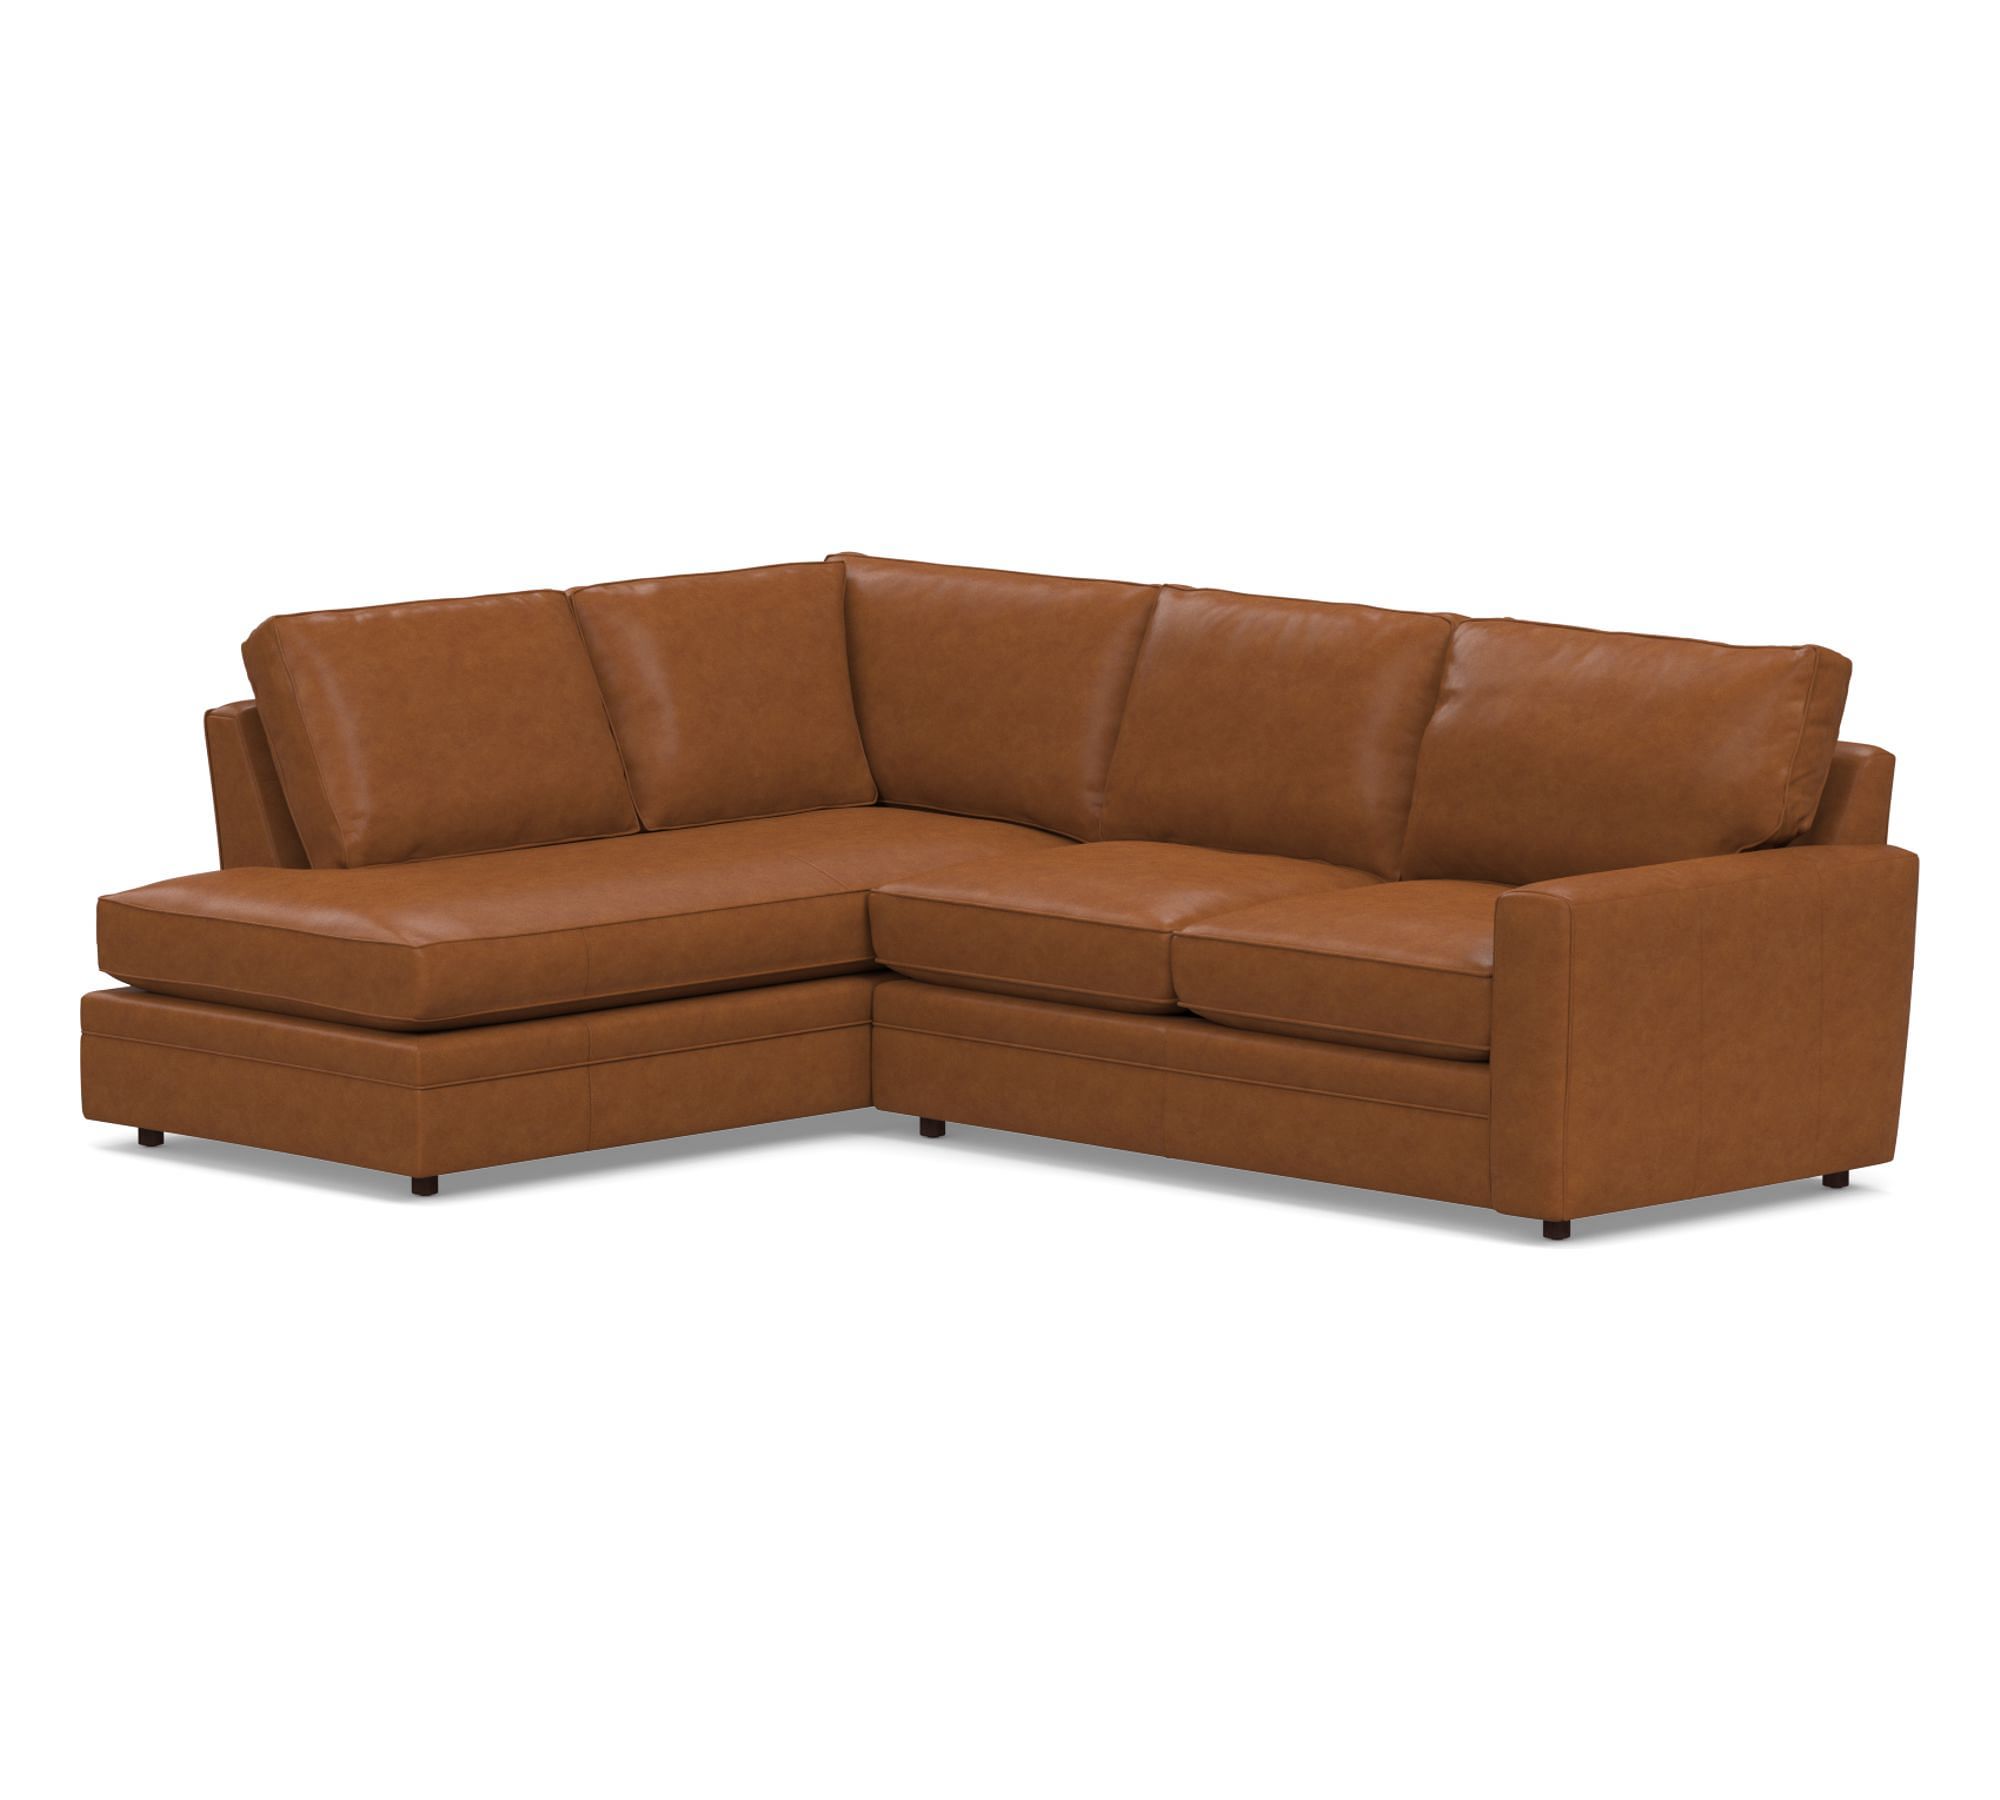 Pearce Square Arm Leather Return Bumper Sectional (112")